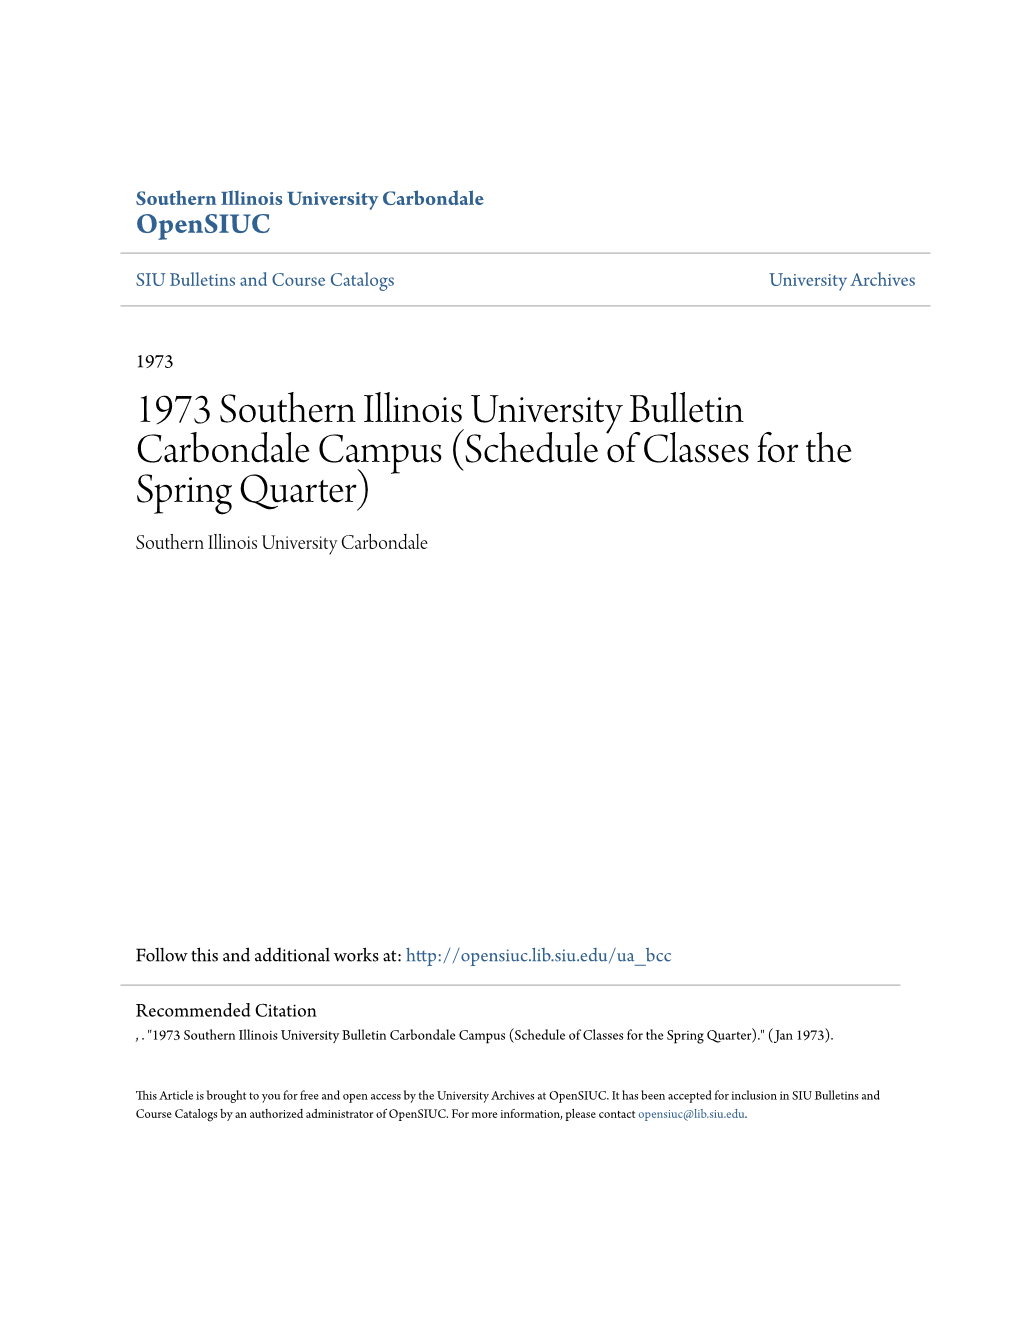 1973 Southern Illinois University Bulletin Carbondale Campus (Schedule of Classes for the Spring Quarter) Southern Illinois University Carbondale